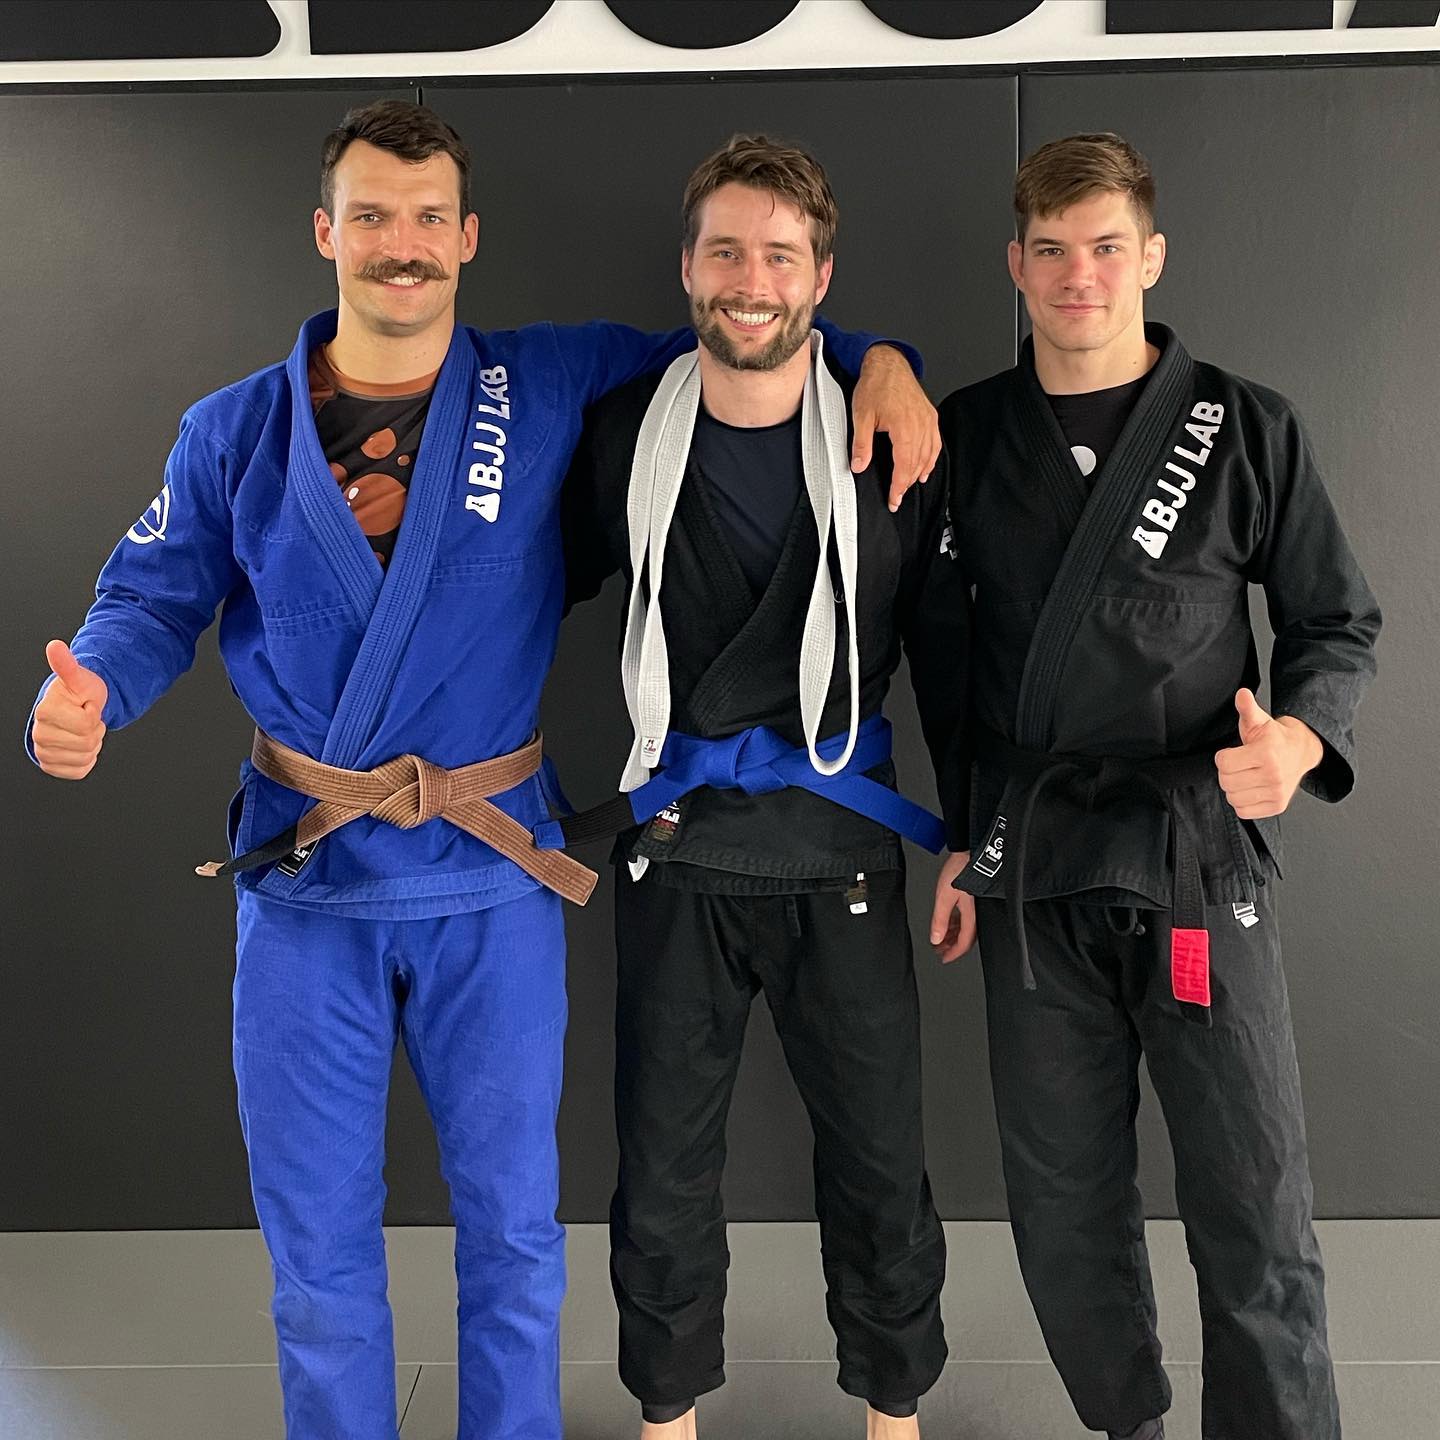 How long does it take to get a blue belt